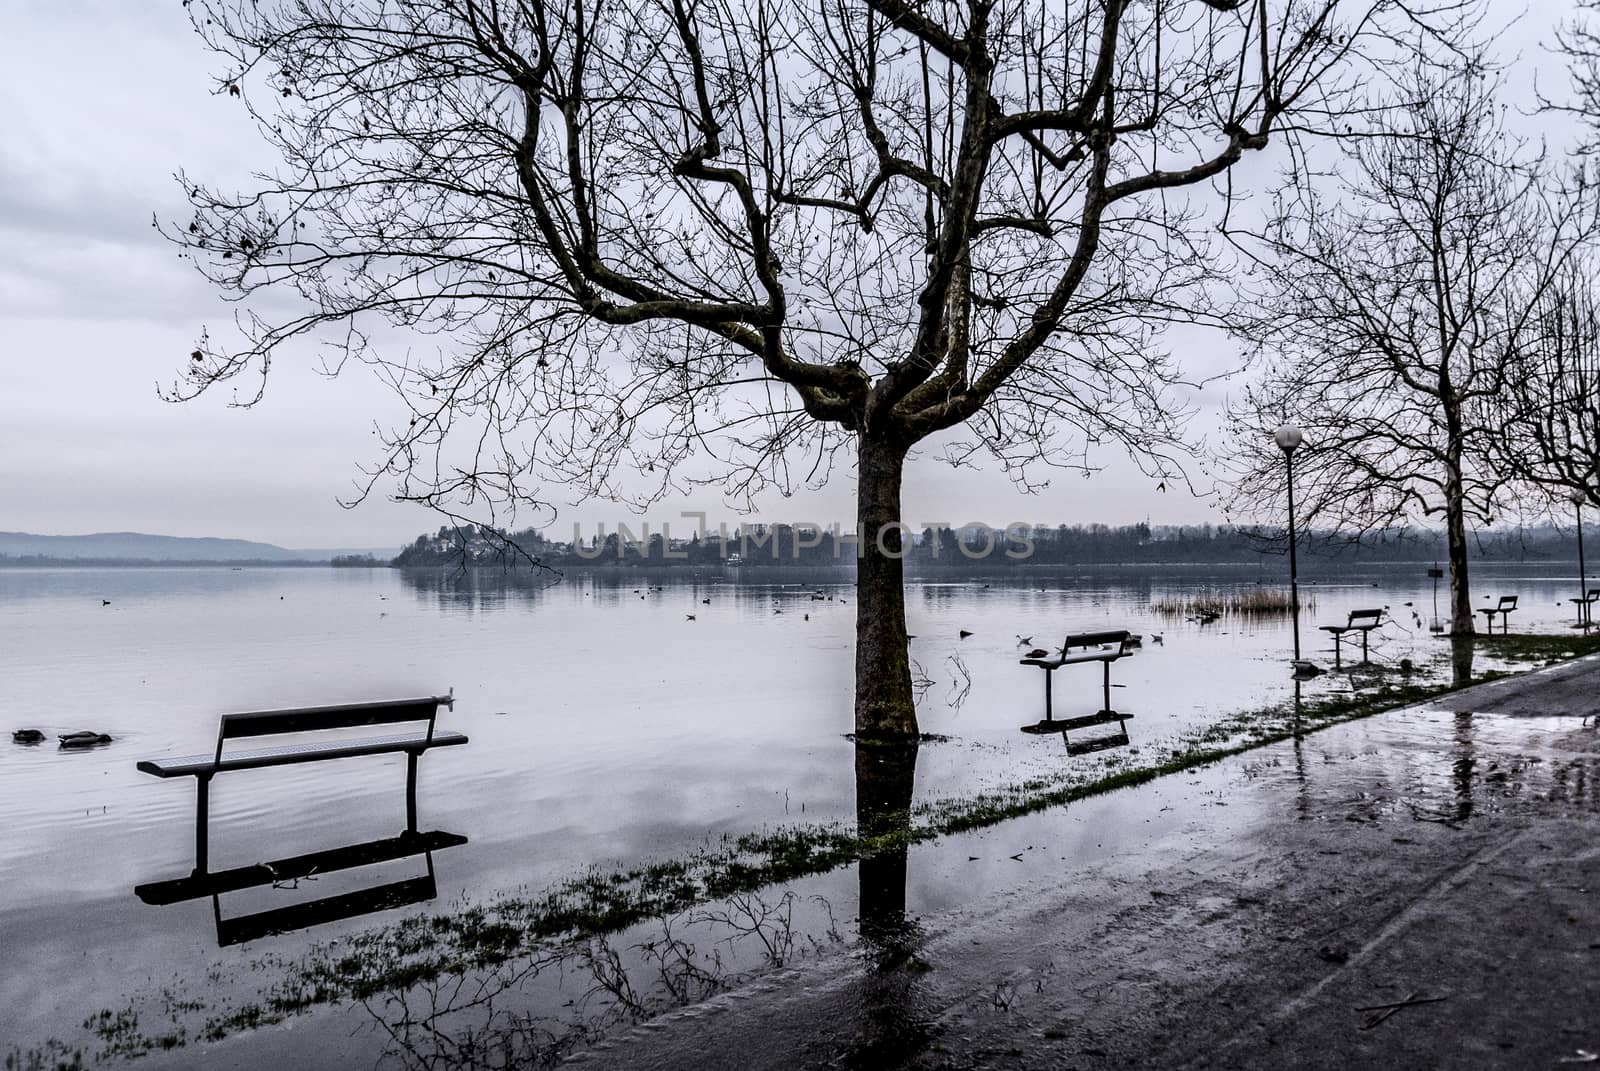 Varese lake, flooding in Gavirate by Mdc1970